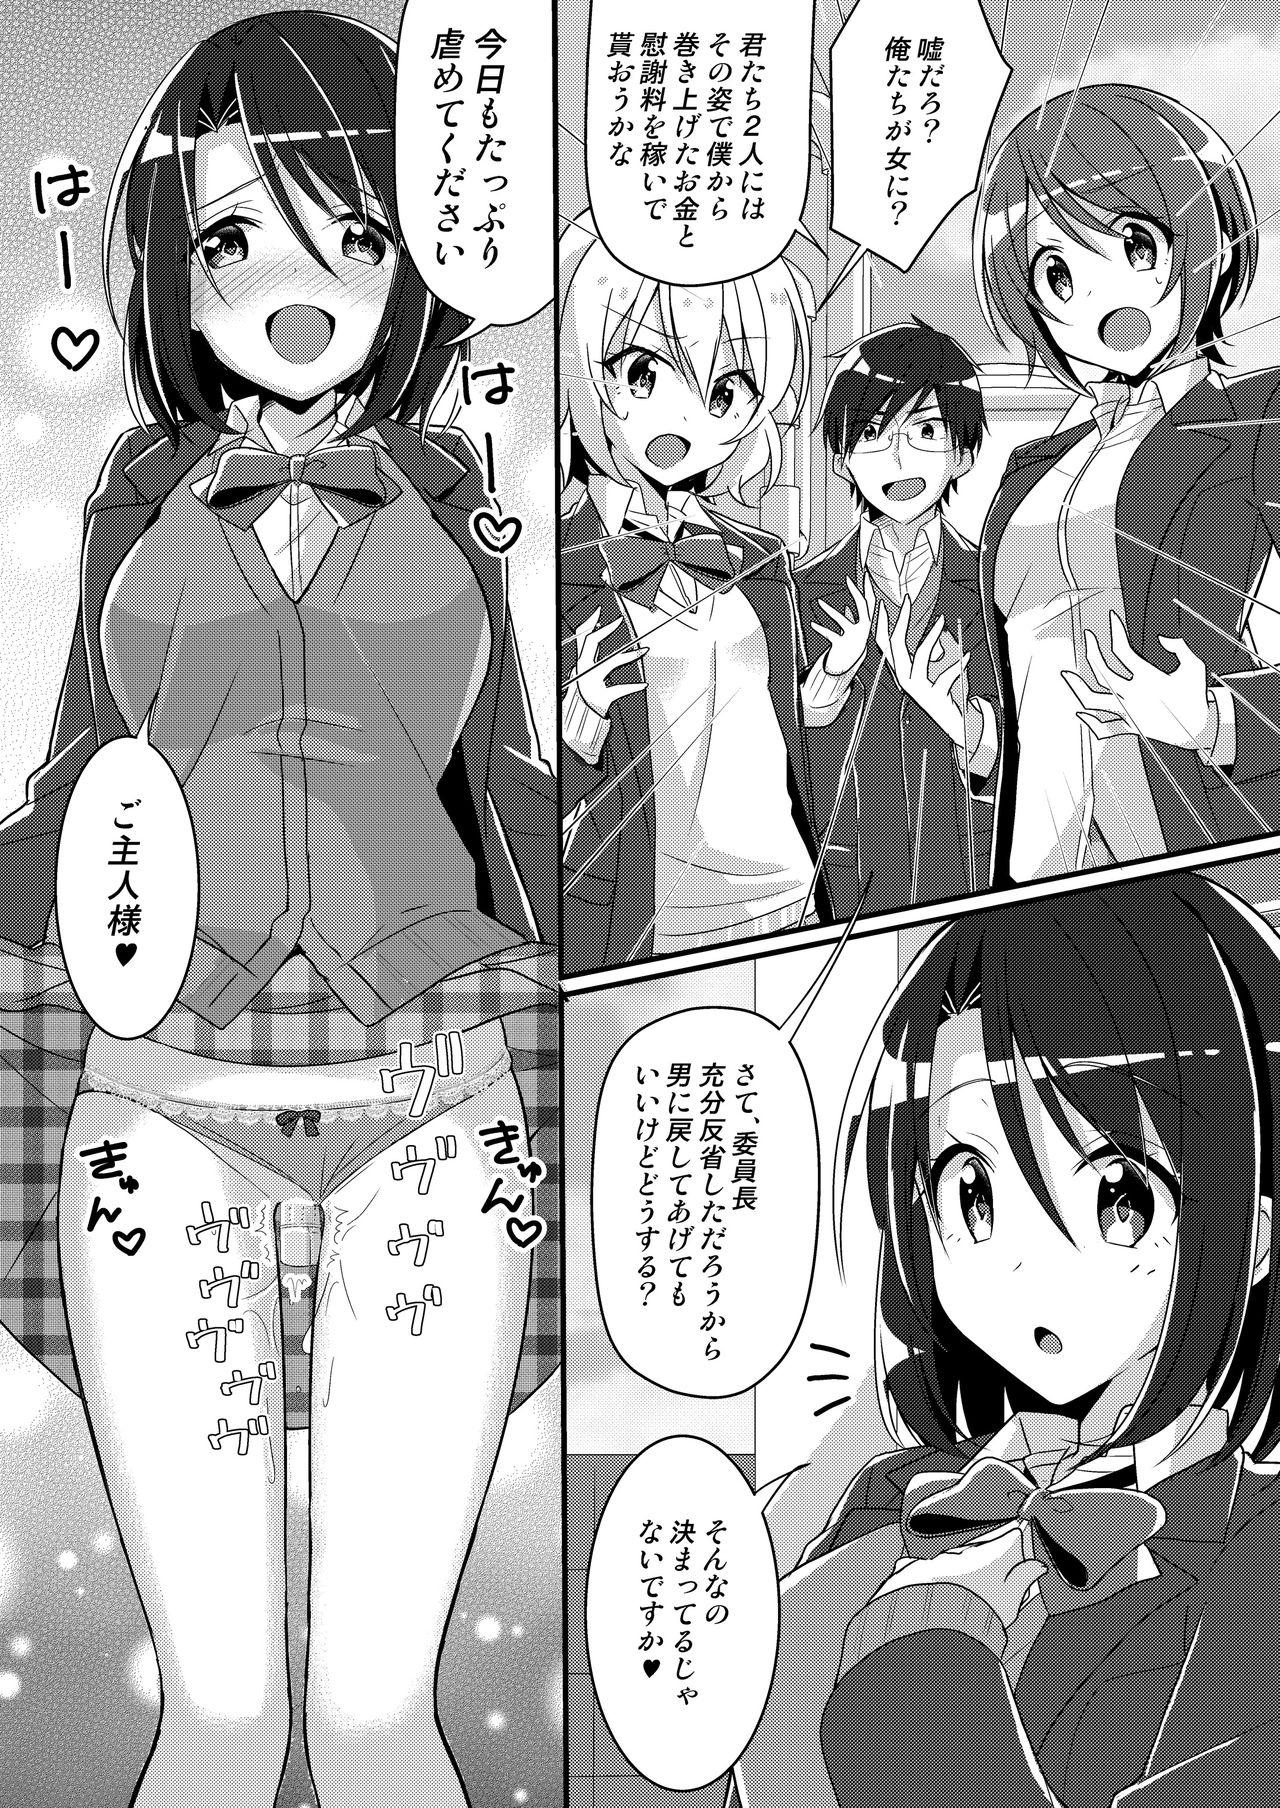 Guyonshemale [Nomu, TSF NO F] Evil Committee Chairman Punished with (♂) Feminization - Original Girls Getting Fucked - Page 82